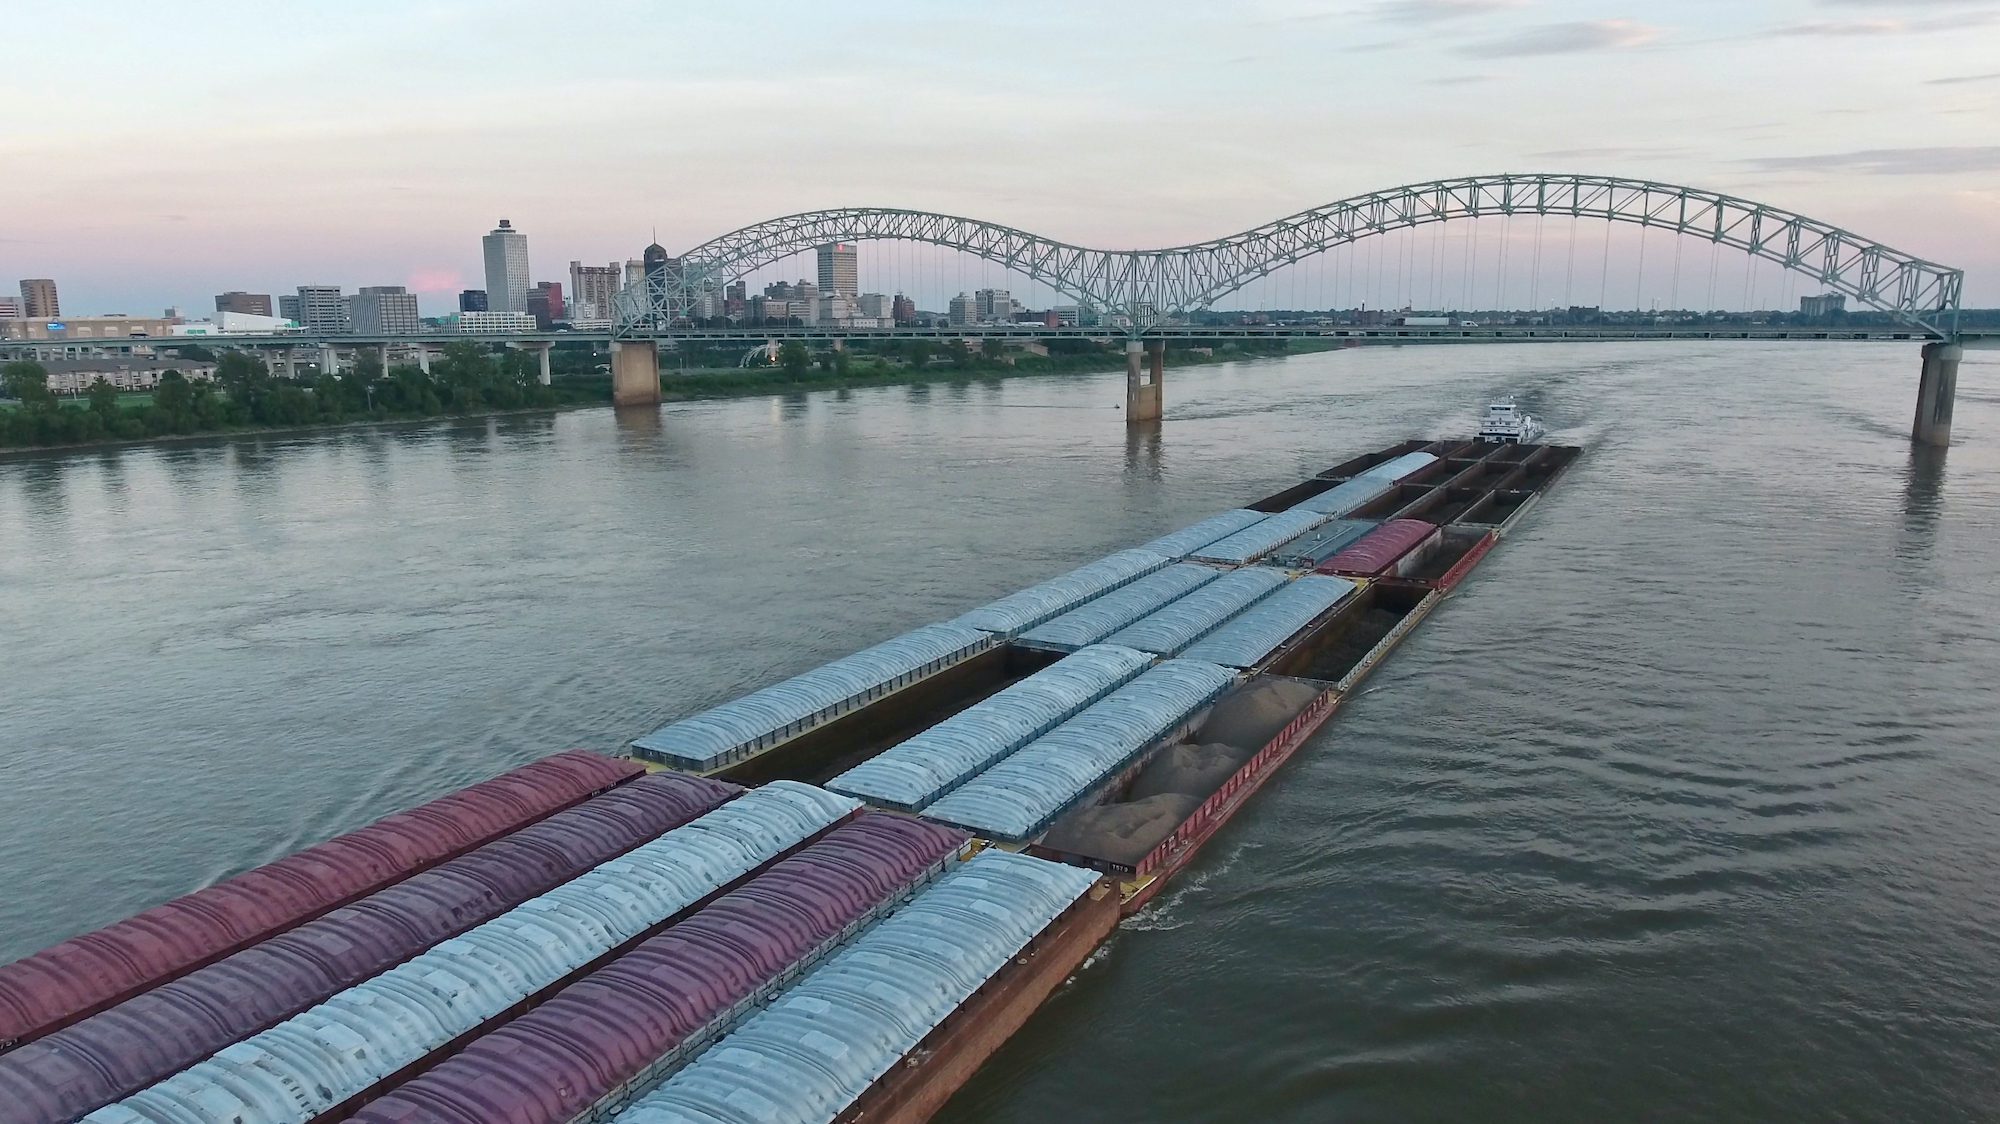 Stock photo of a barge on the Mississippi River